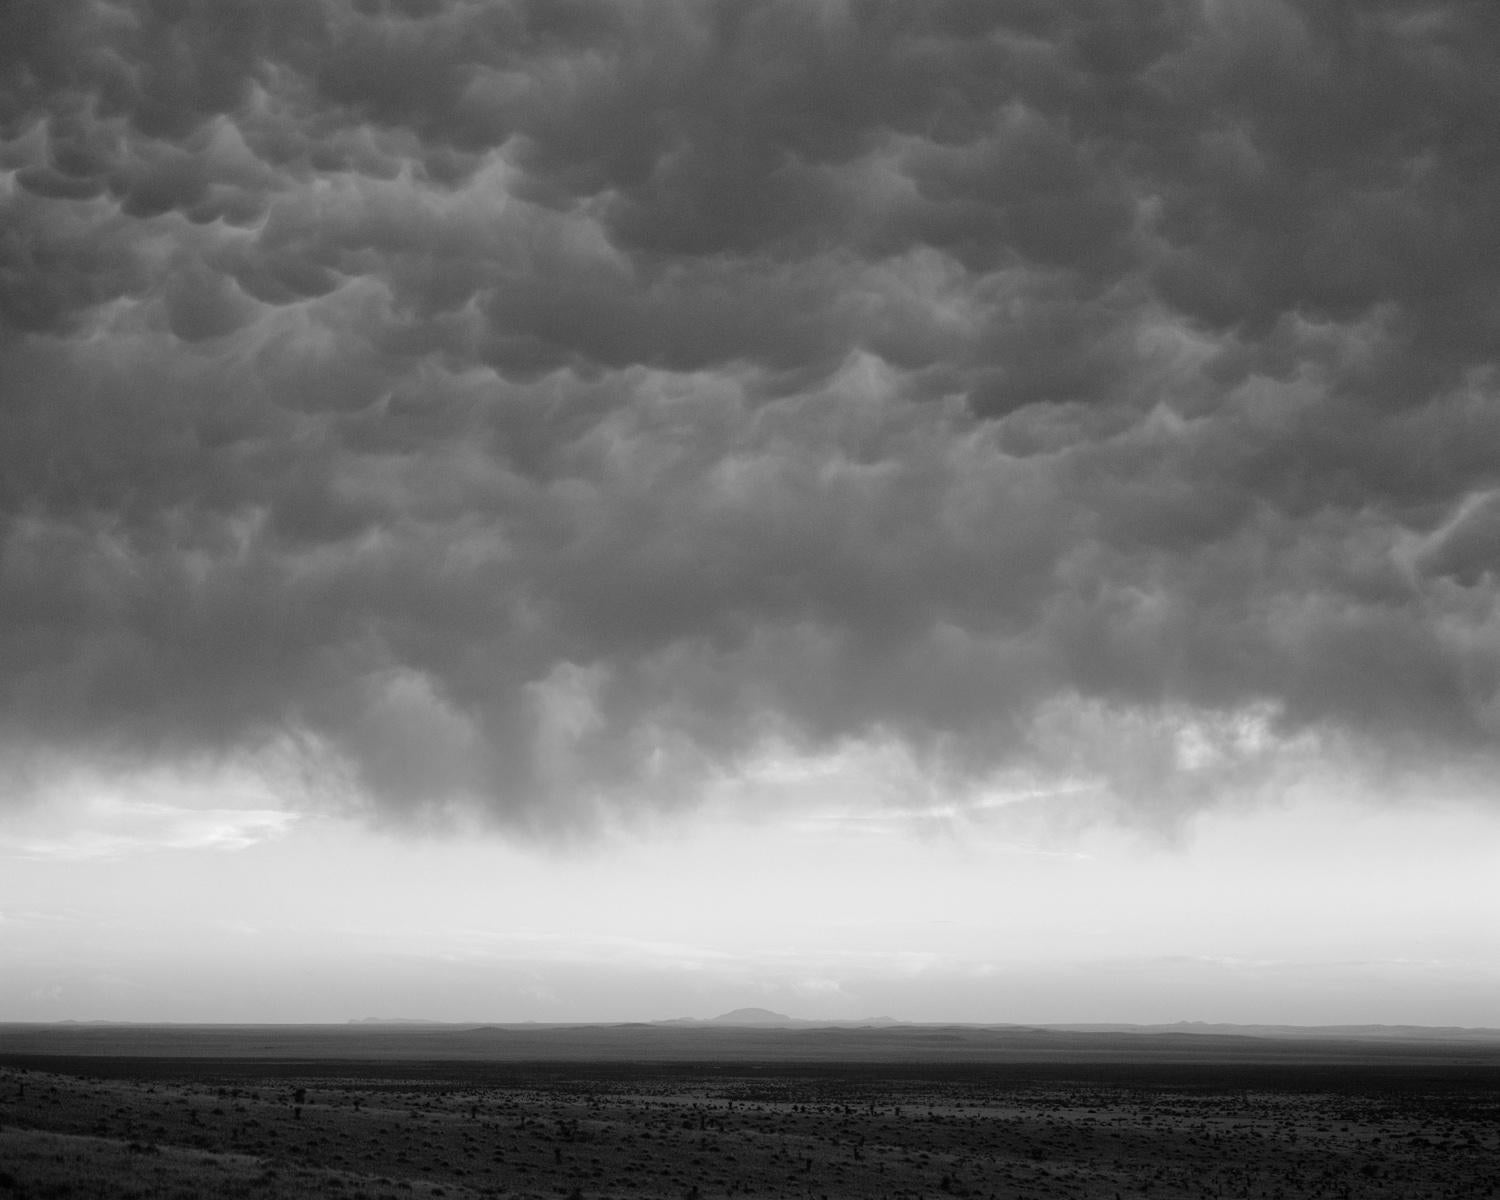 Michael Berman. Storm. Chinati Grasslands. Marfa, TX, 2009 (08s.054 Clouds). Archival pigment ink print. Image Size: 20x25".  Edition of 12. Signed, dated, titled, and editioned on print verso. Signed, dated, and editioned on print recto. 